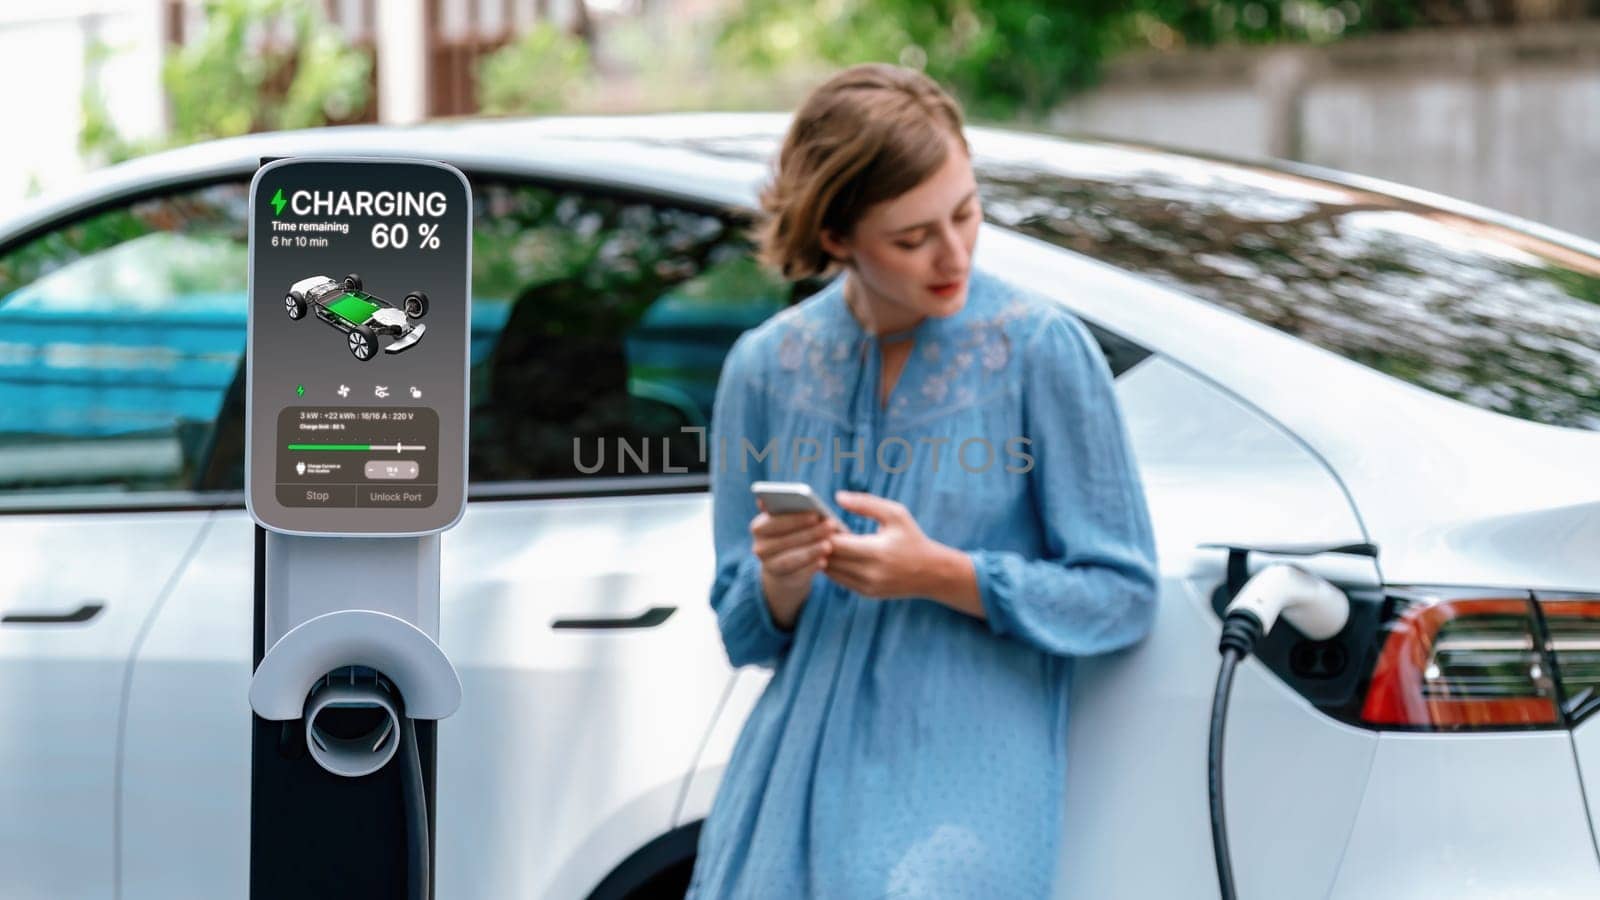 Electric vehicle recharging battery from home EV charging station using alternative energy with net zero emission on blurred background of young girl charging her car before vacation travel. Perpetual